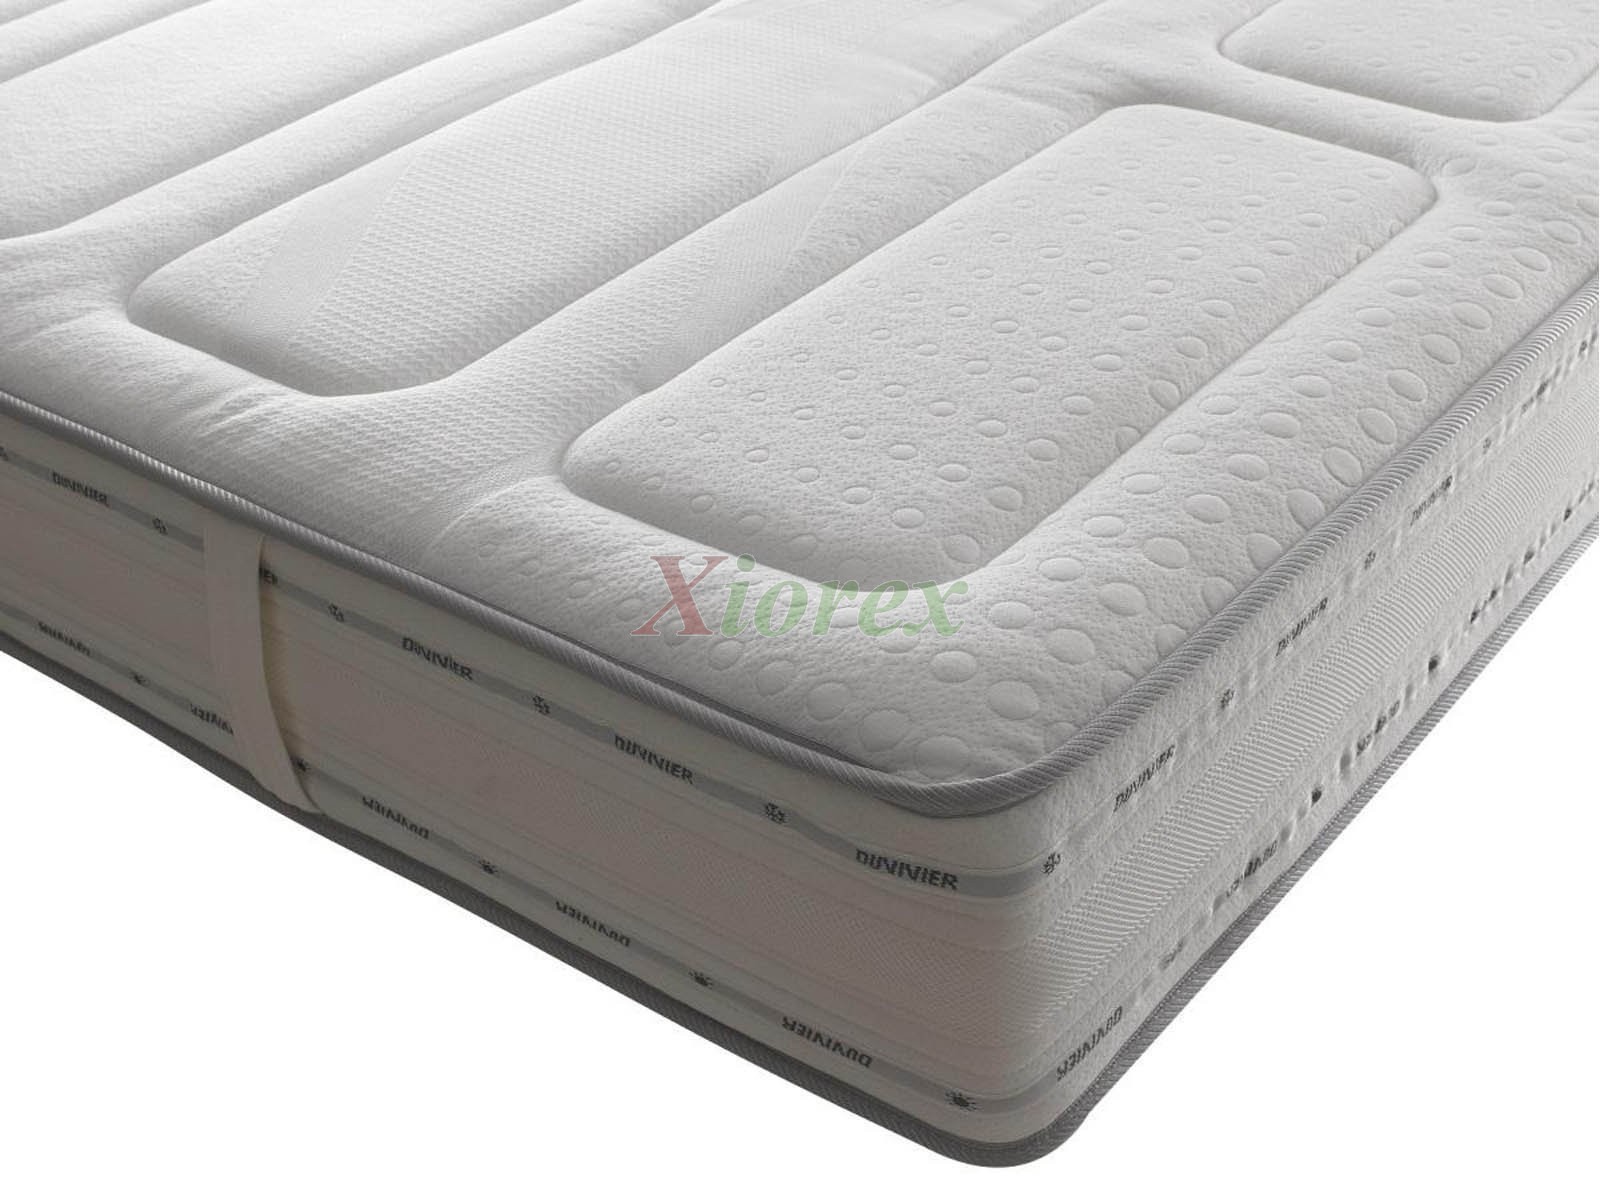 Baby Cot Bed SPRUNG SPRING MATTRESS Quilted Extra Thick 13 CM BABY REX